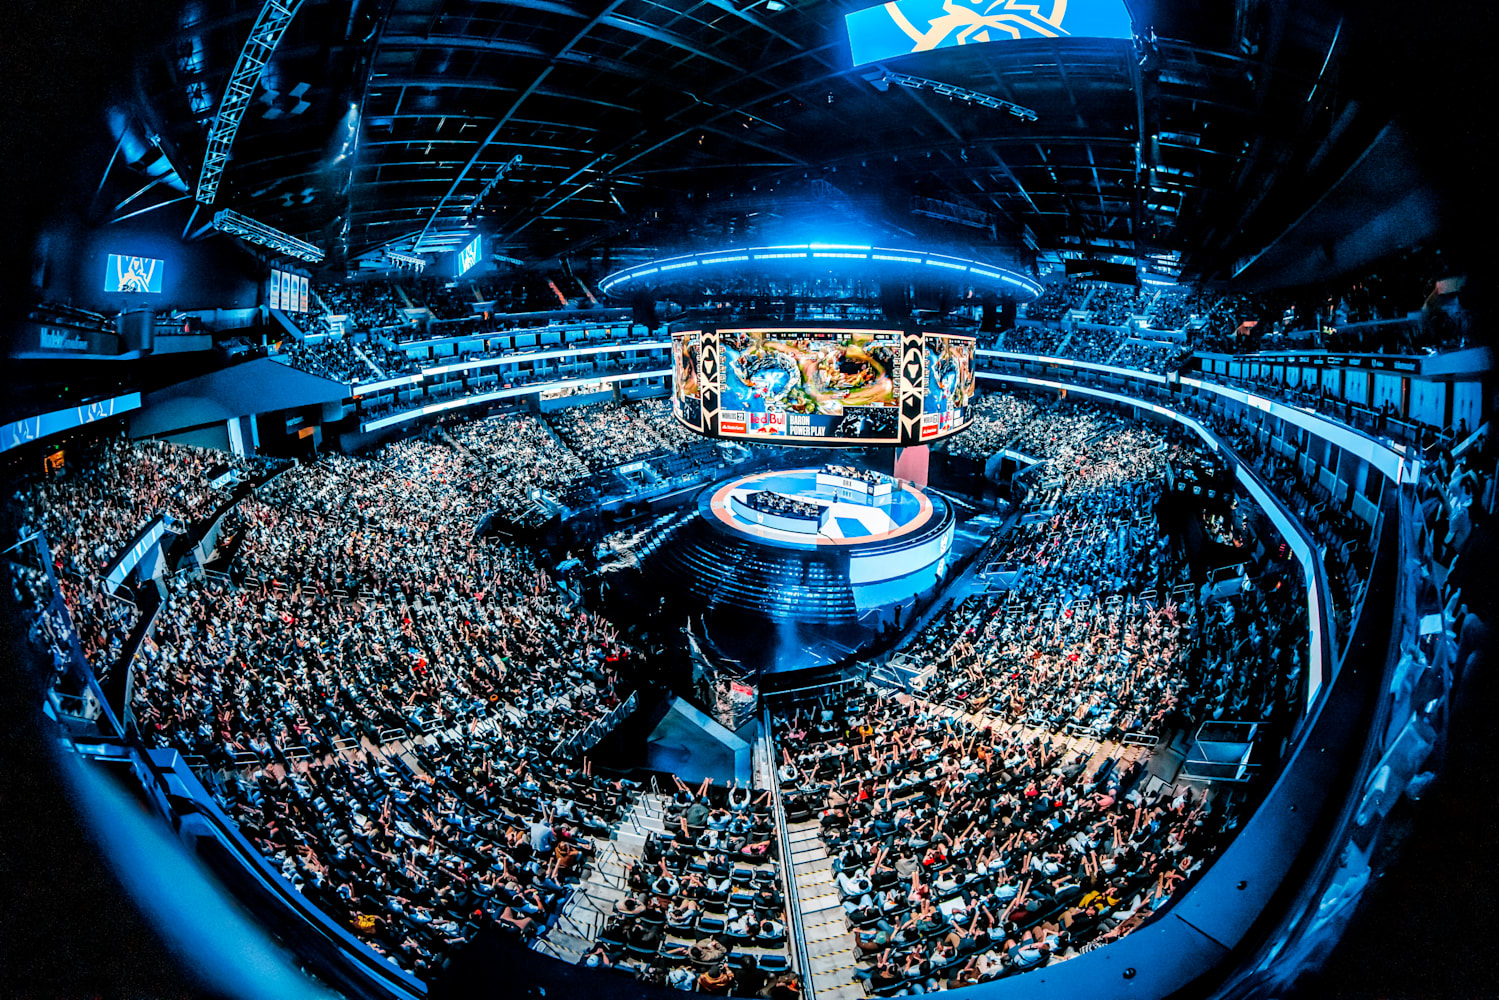 Ranking all 24 teams at the League of Legends World Championship